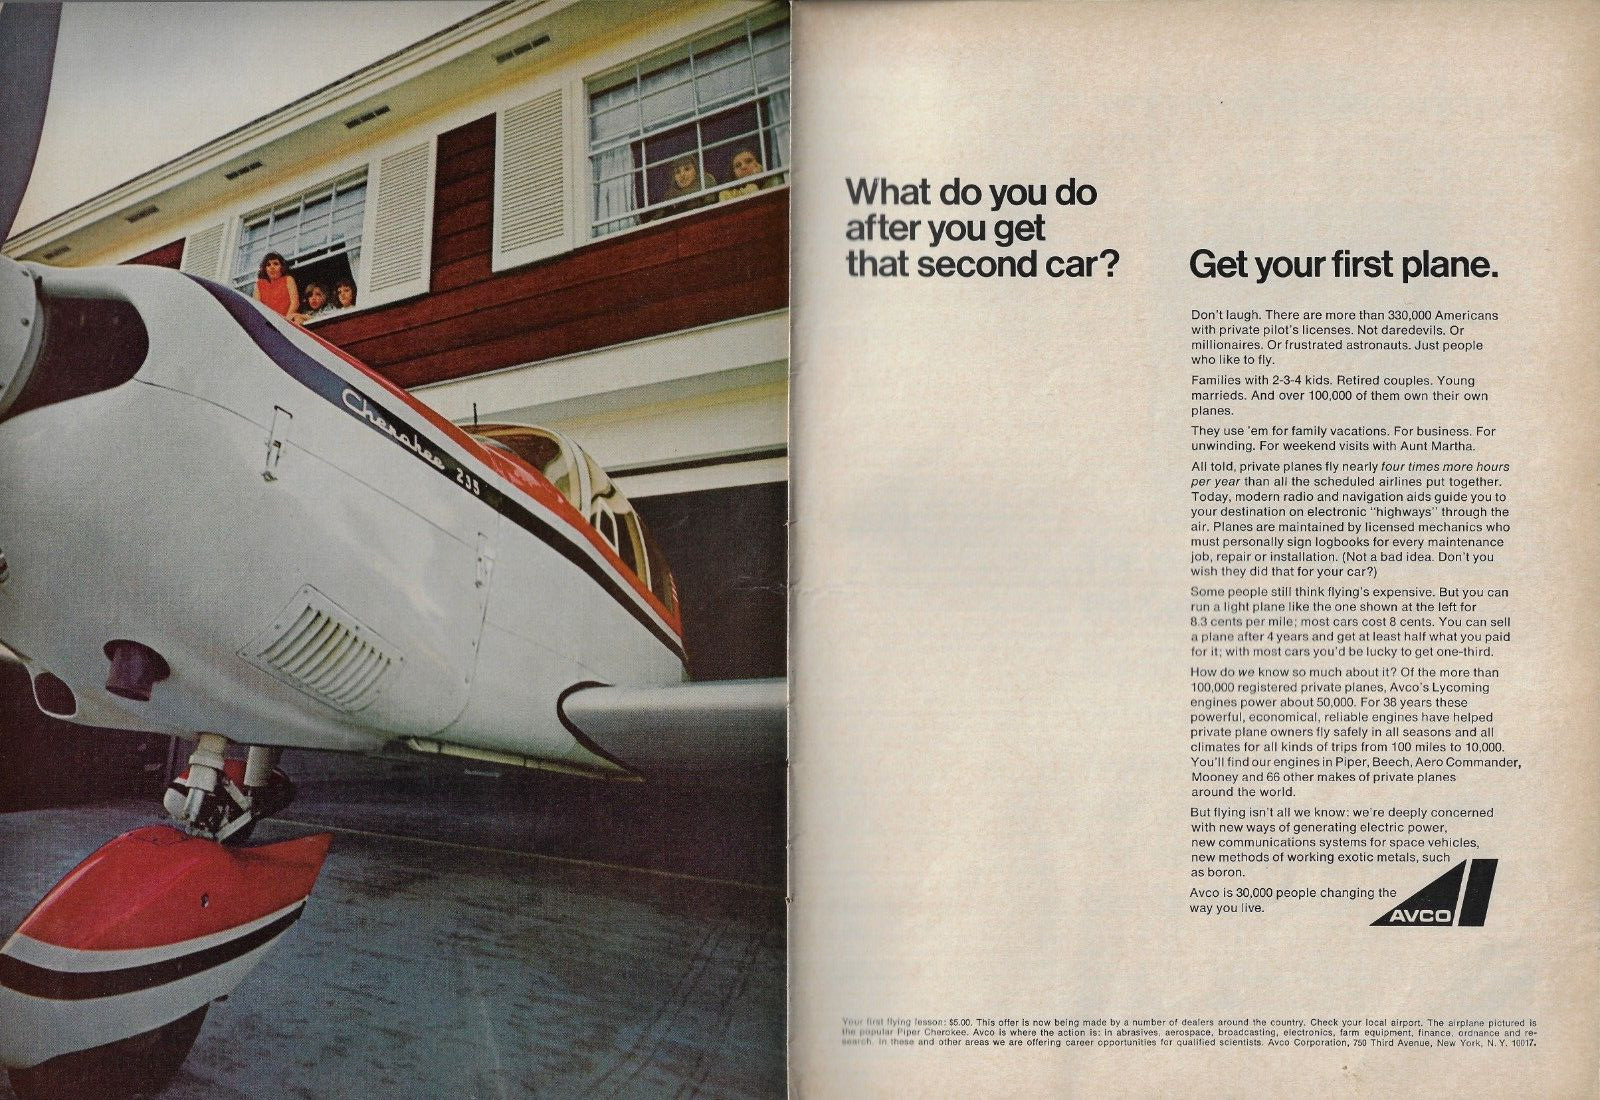 1966 AVCO 330,000 American with Private Pilot Licenses Plane VINTAGE PRINT AD